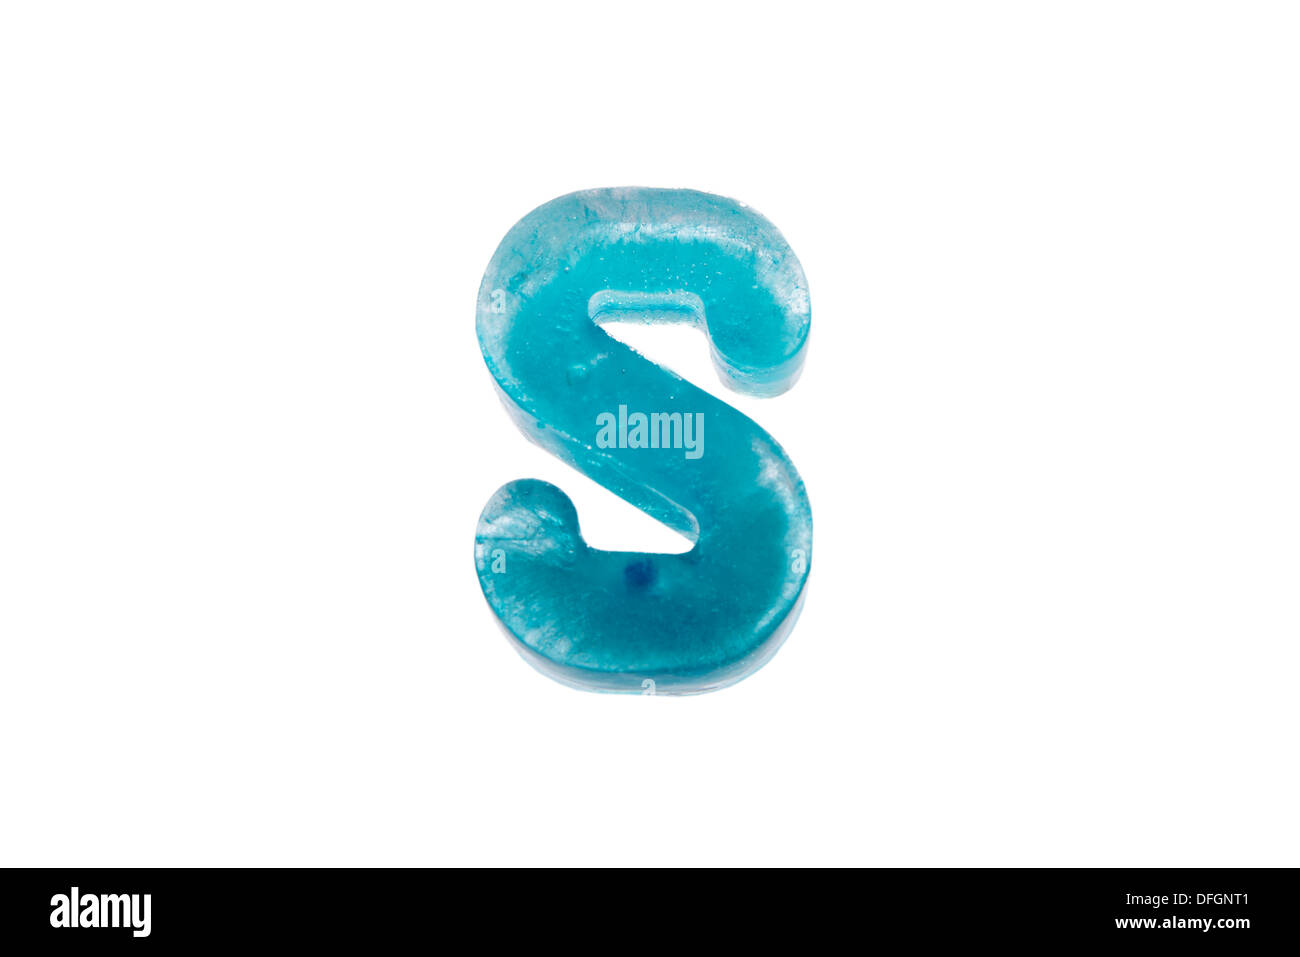 S, letter s made from blue ice Stock Photo - Alamy